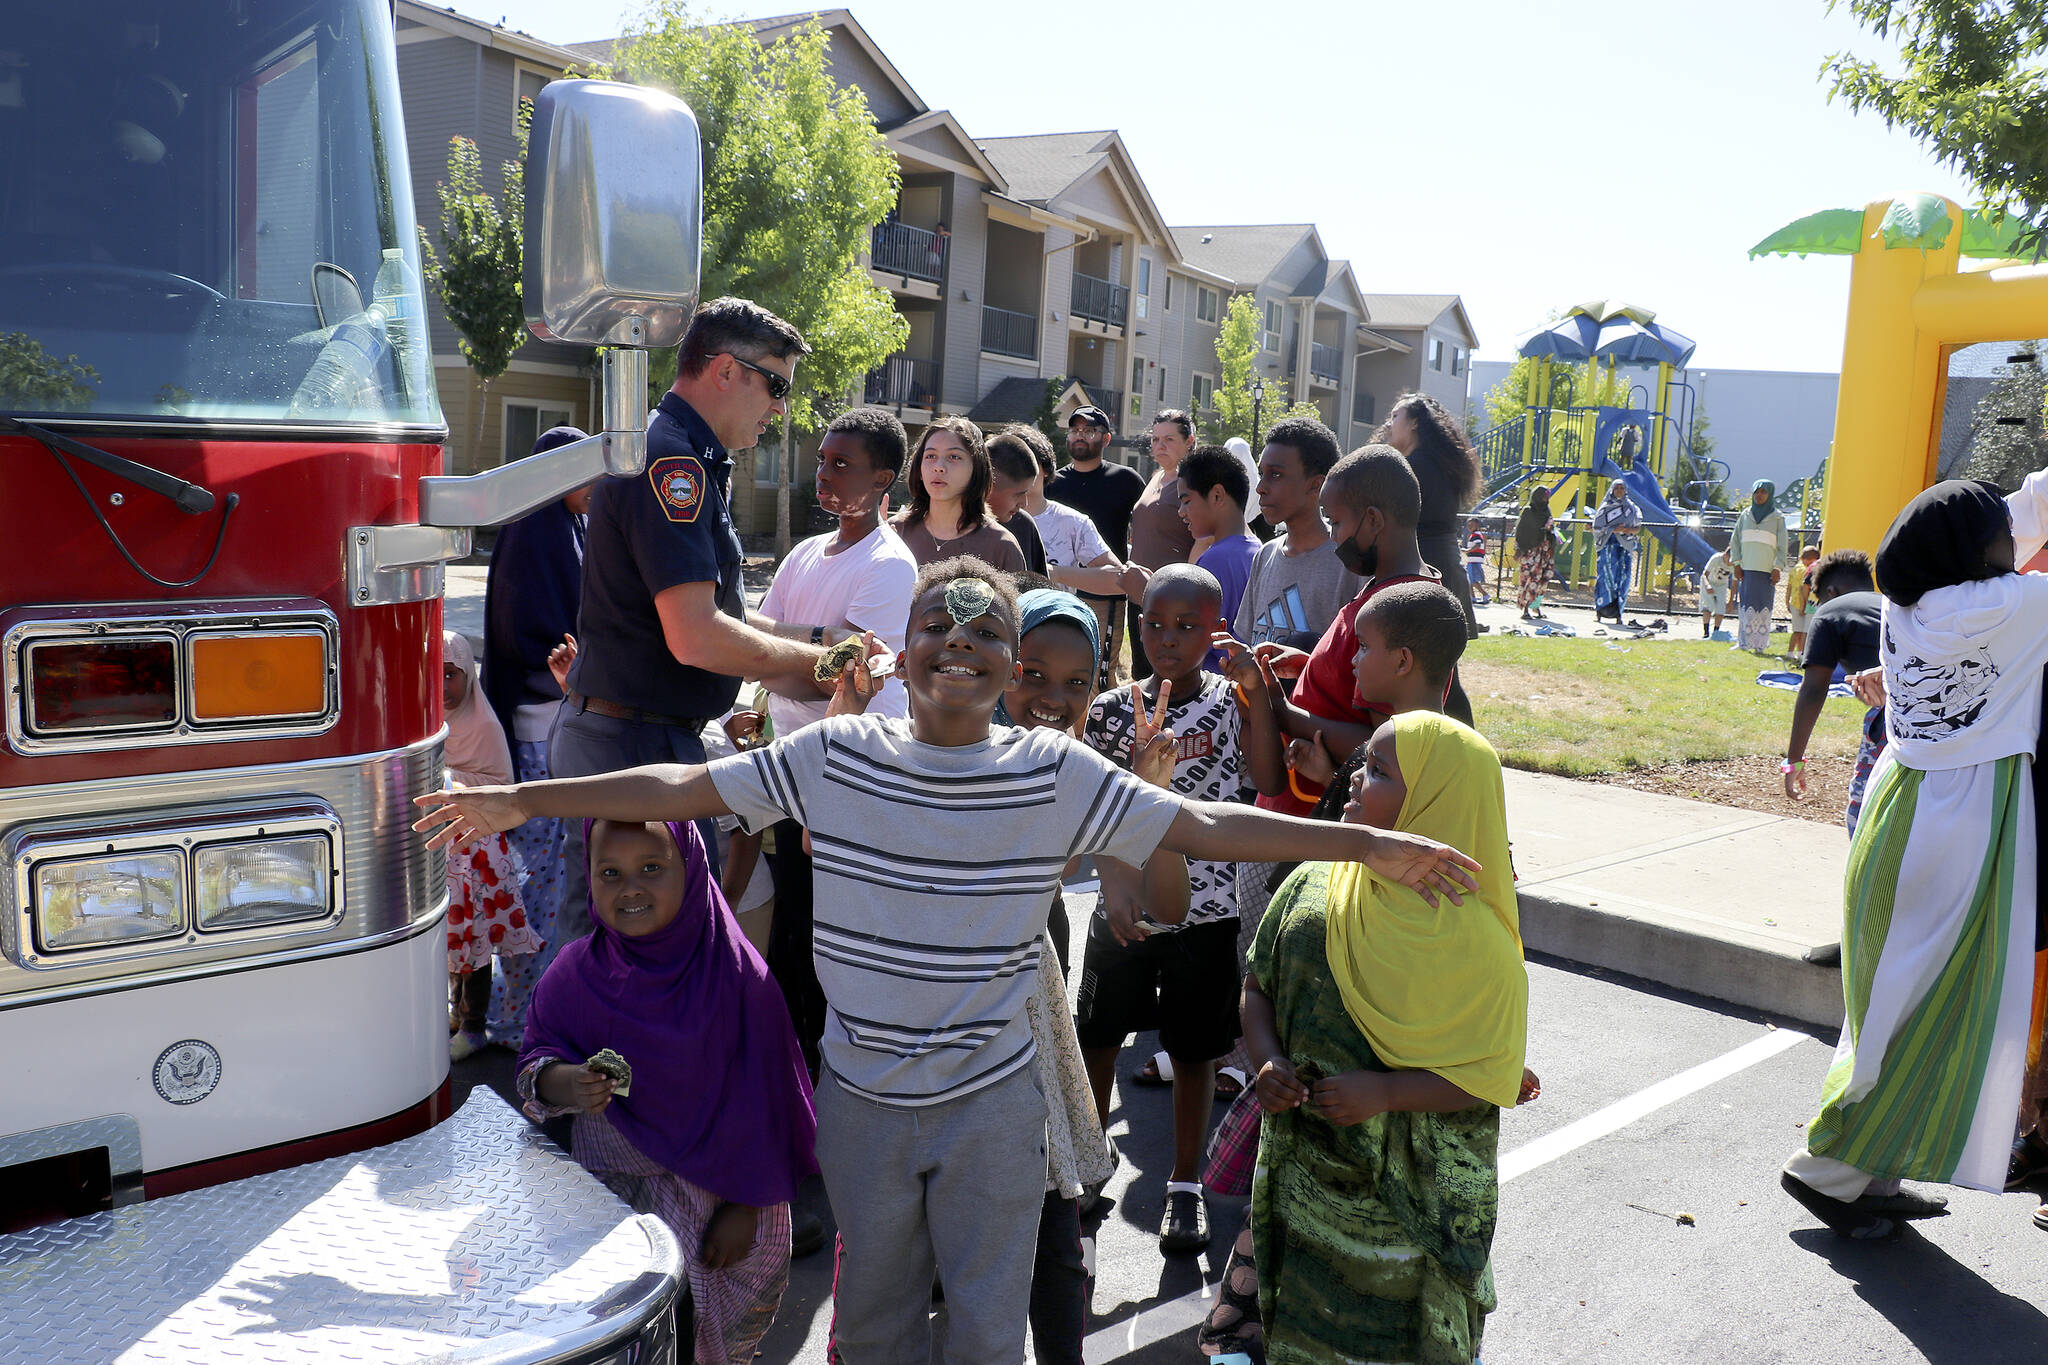 Capt. Brad Chaney hands out fire helmets and sticker badges to kids at the Kitt’s Corner Apartments on Aug. 2. Photo by Jack Reale